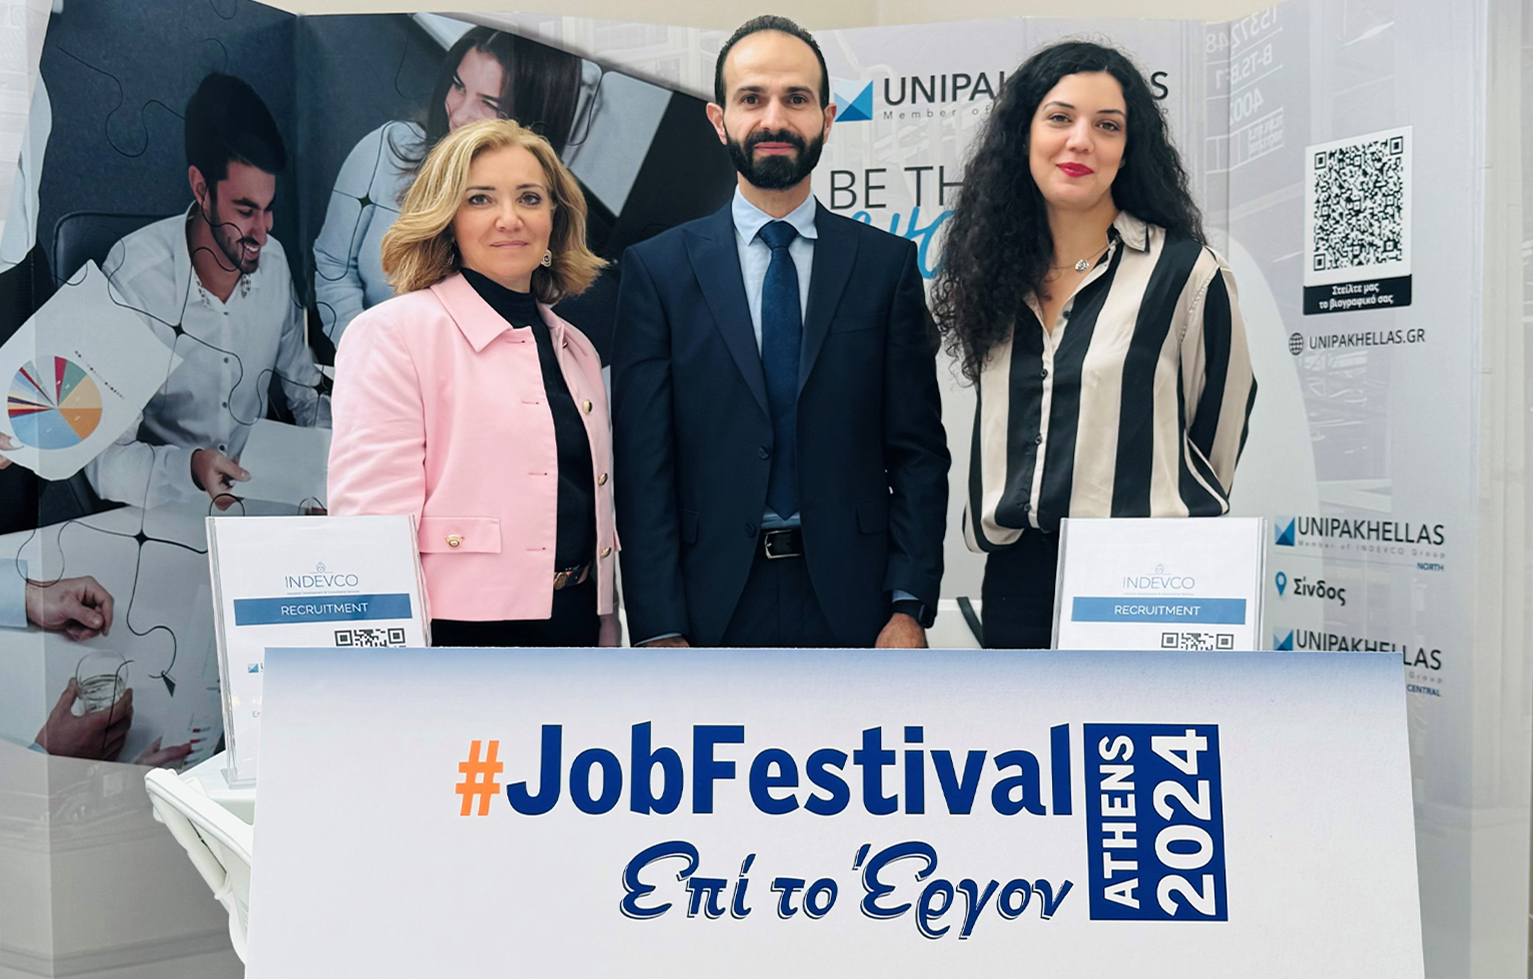 UNIPAKHELLAS Delivers Exceptional Job Opportunities at Skywalker Job Festival